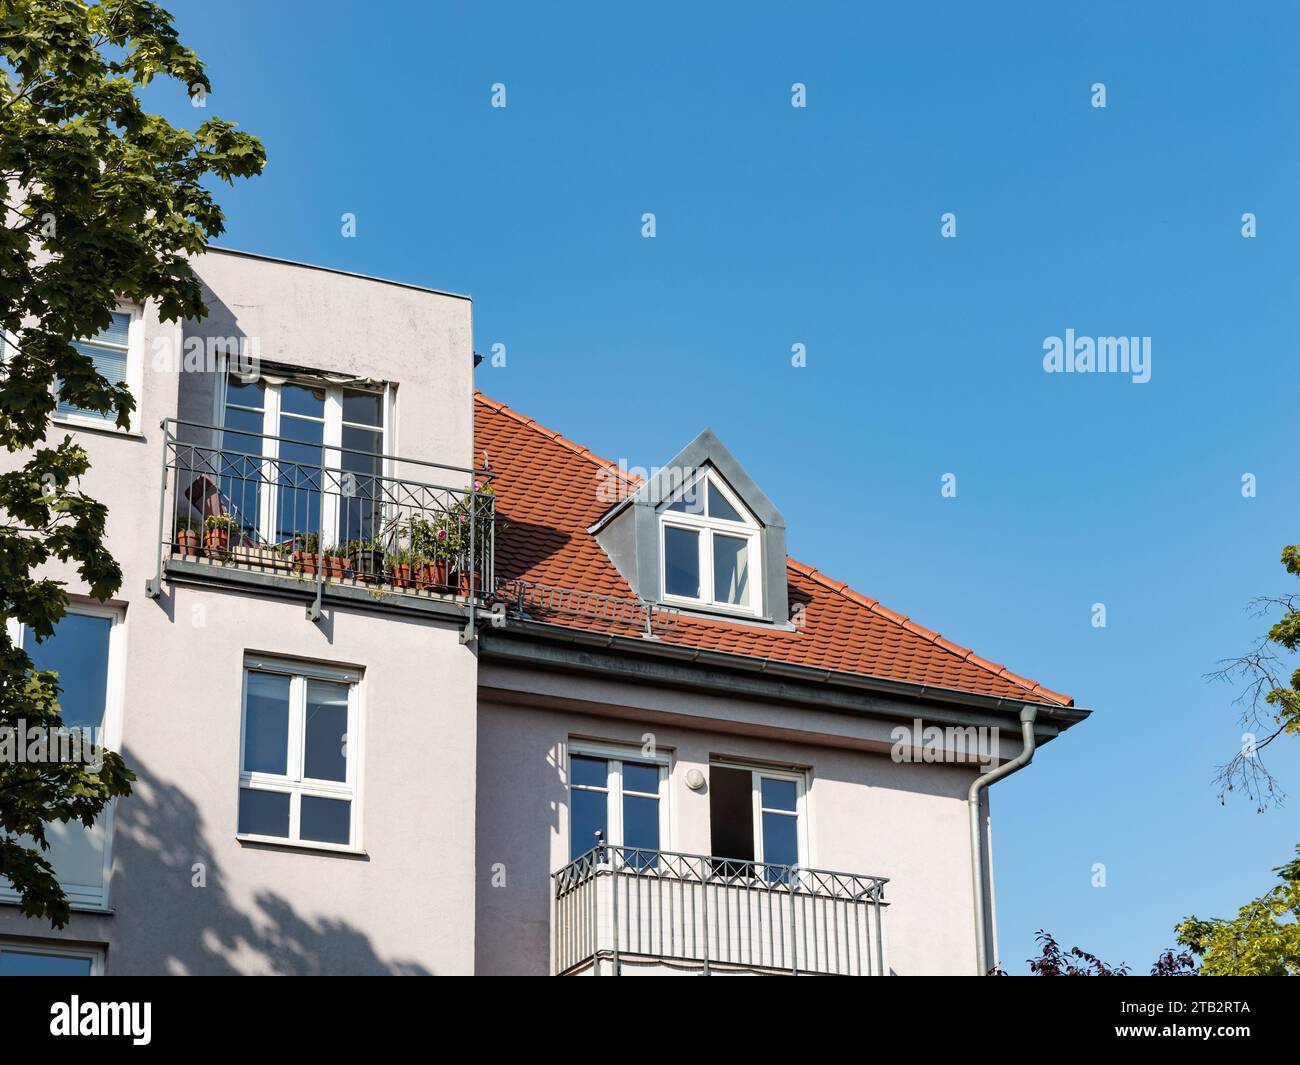 Building exterior with a dormer window on the rooftop. Balconies on the house facade. Apartment building with multiple dwellings is real estate. Stock Photo